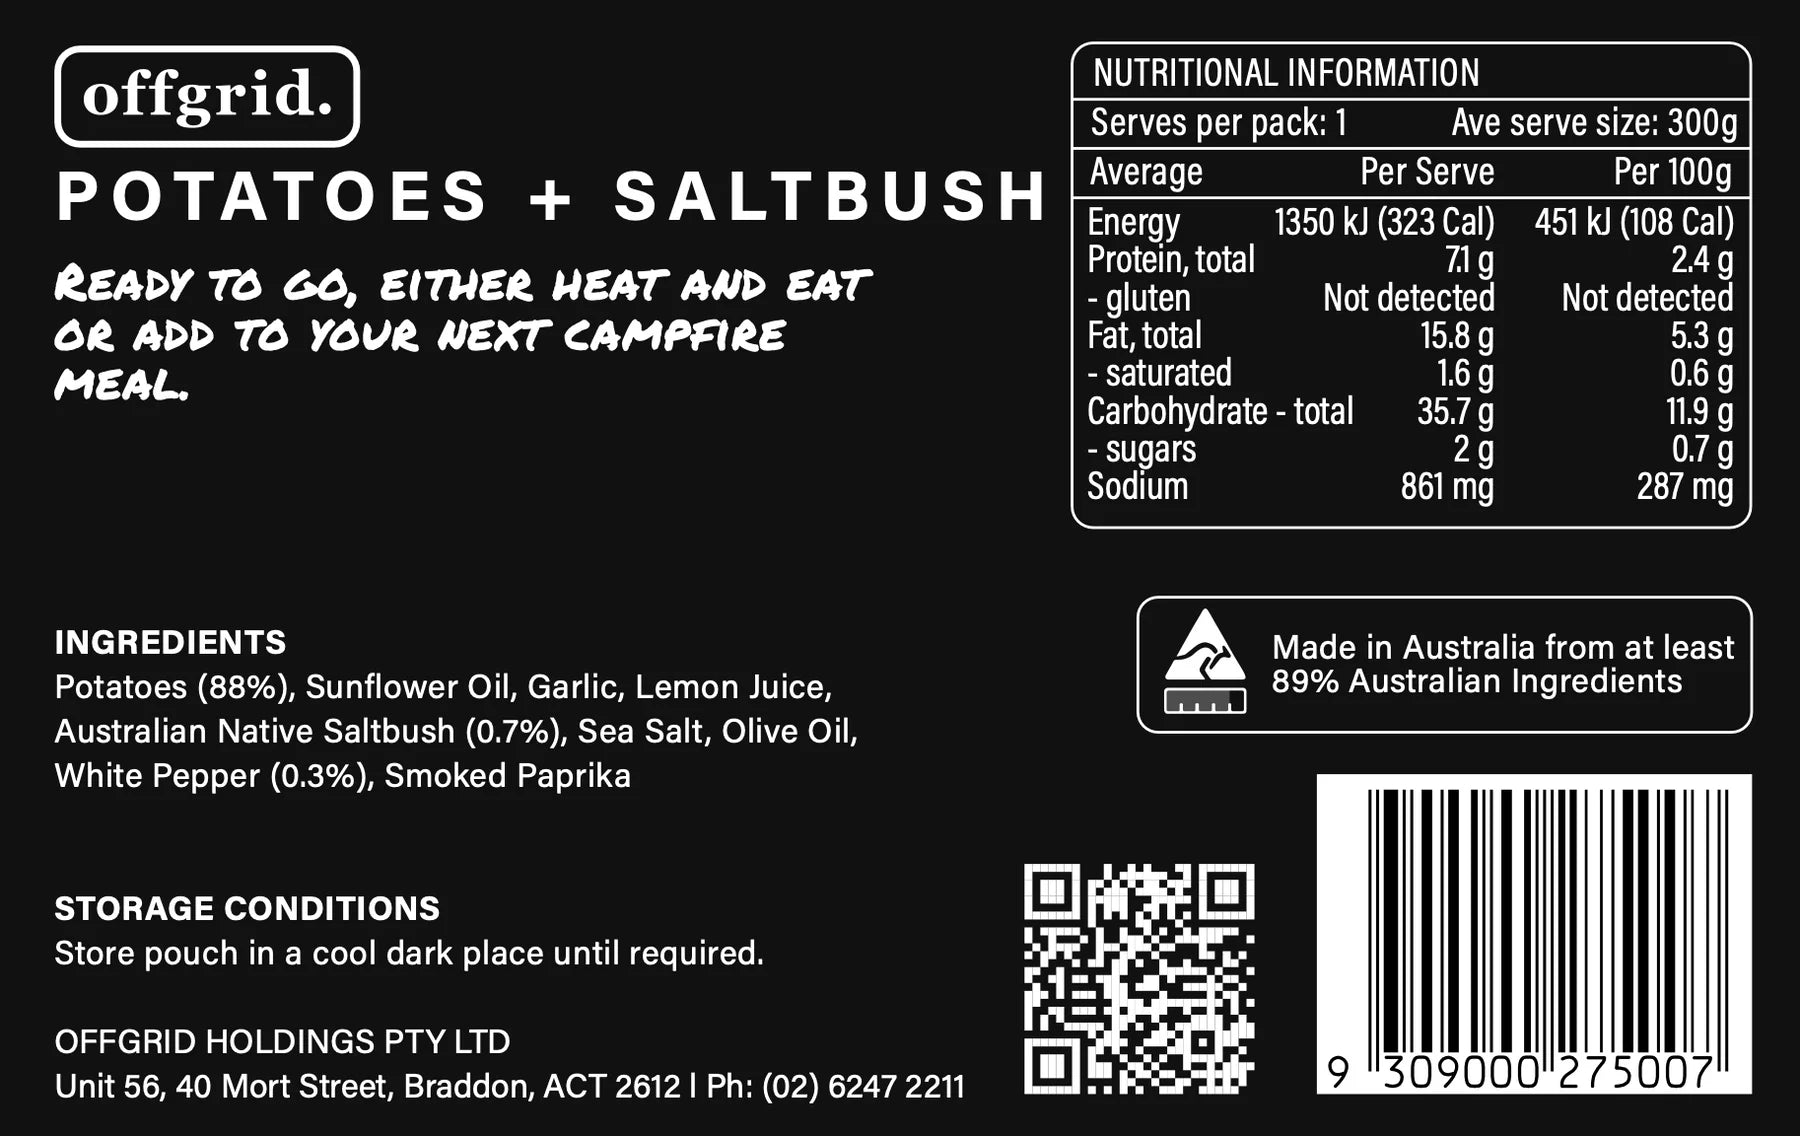 Offgrid Provisions Saltbush Potatoes - 300g -  - Mansfield Hunting & Fishing - Products to prepare for Corona Virus